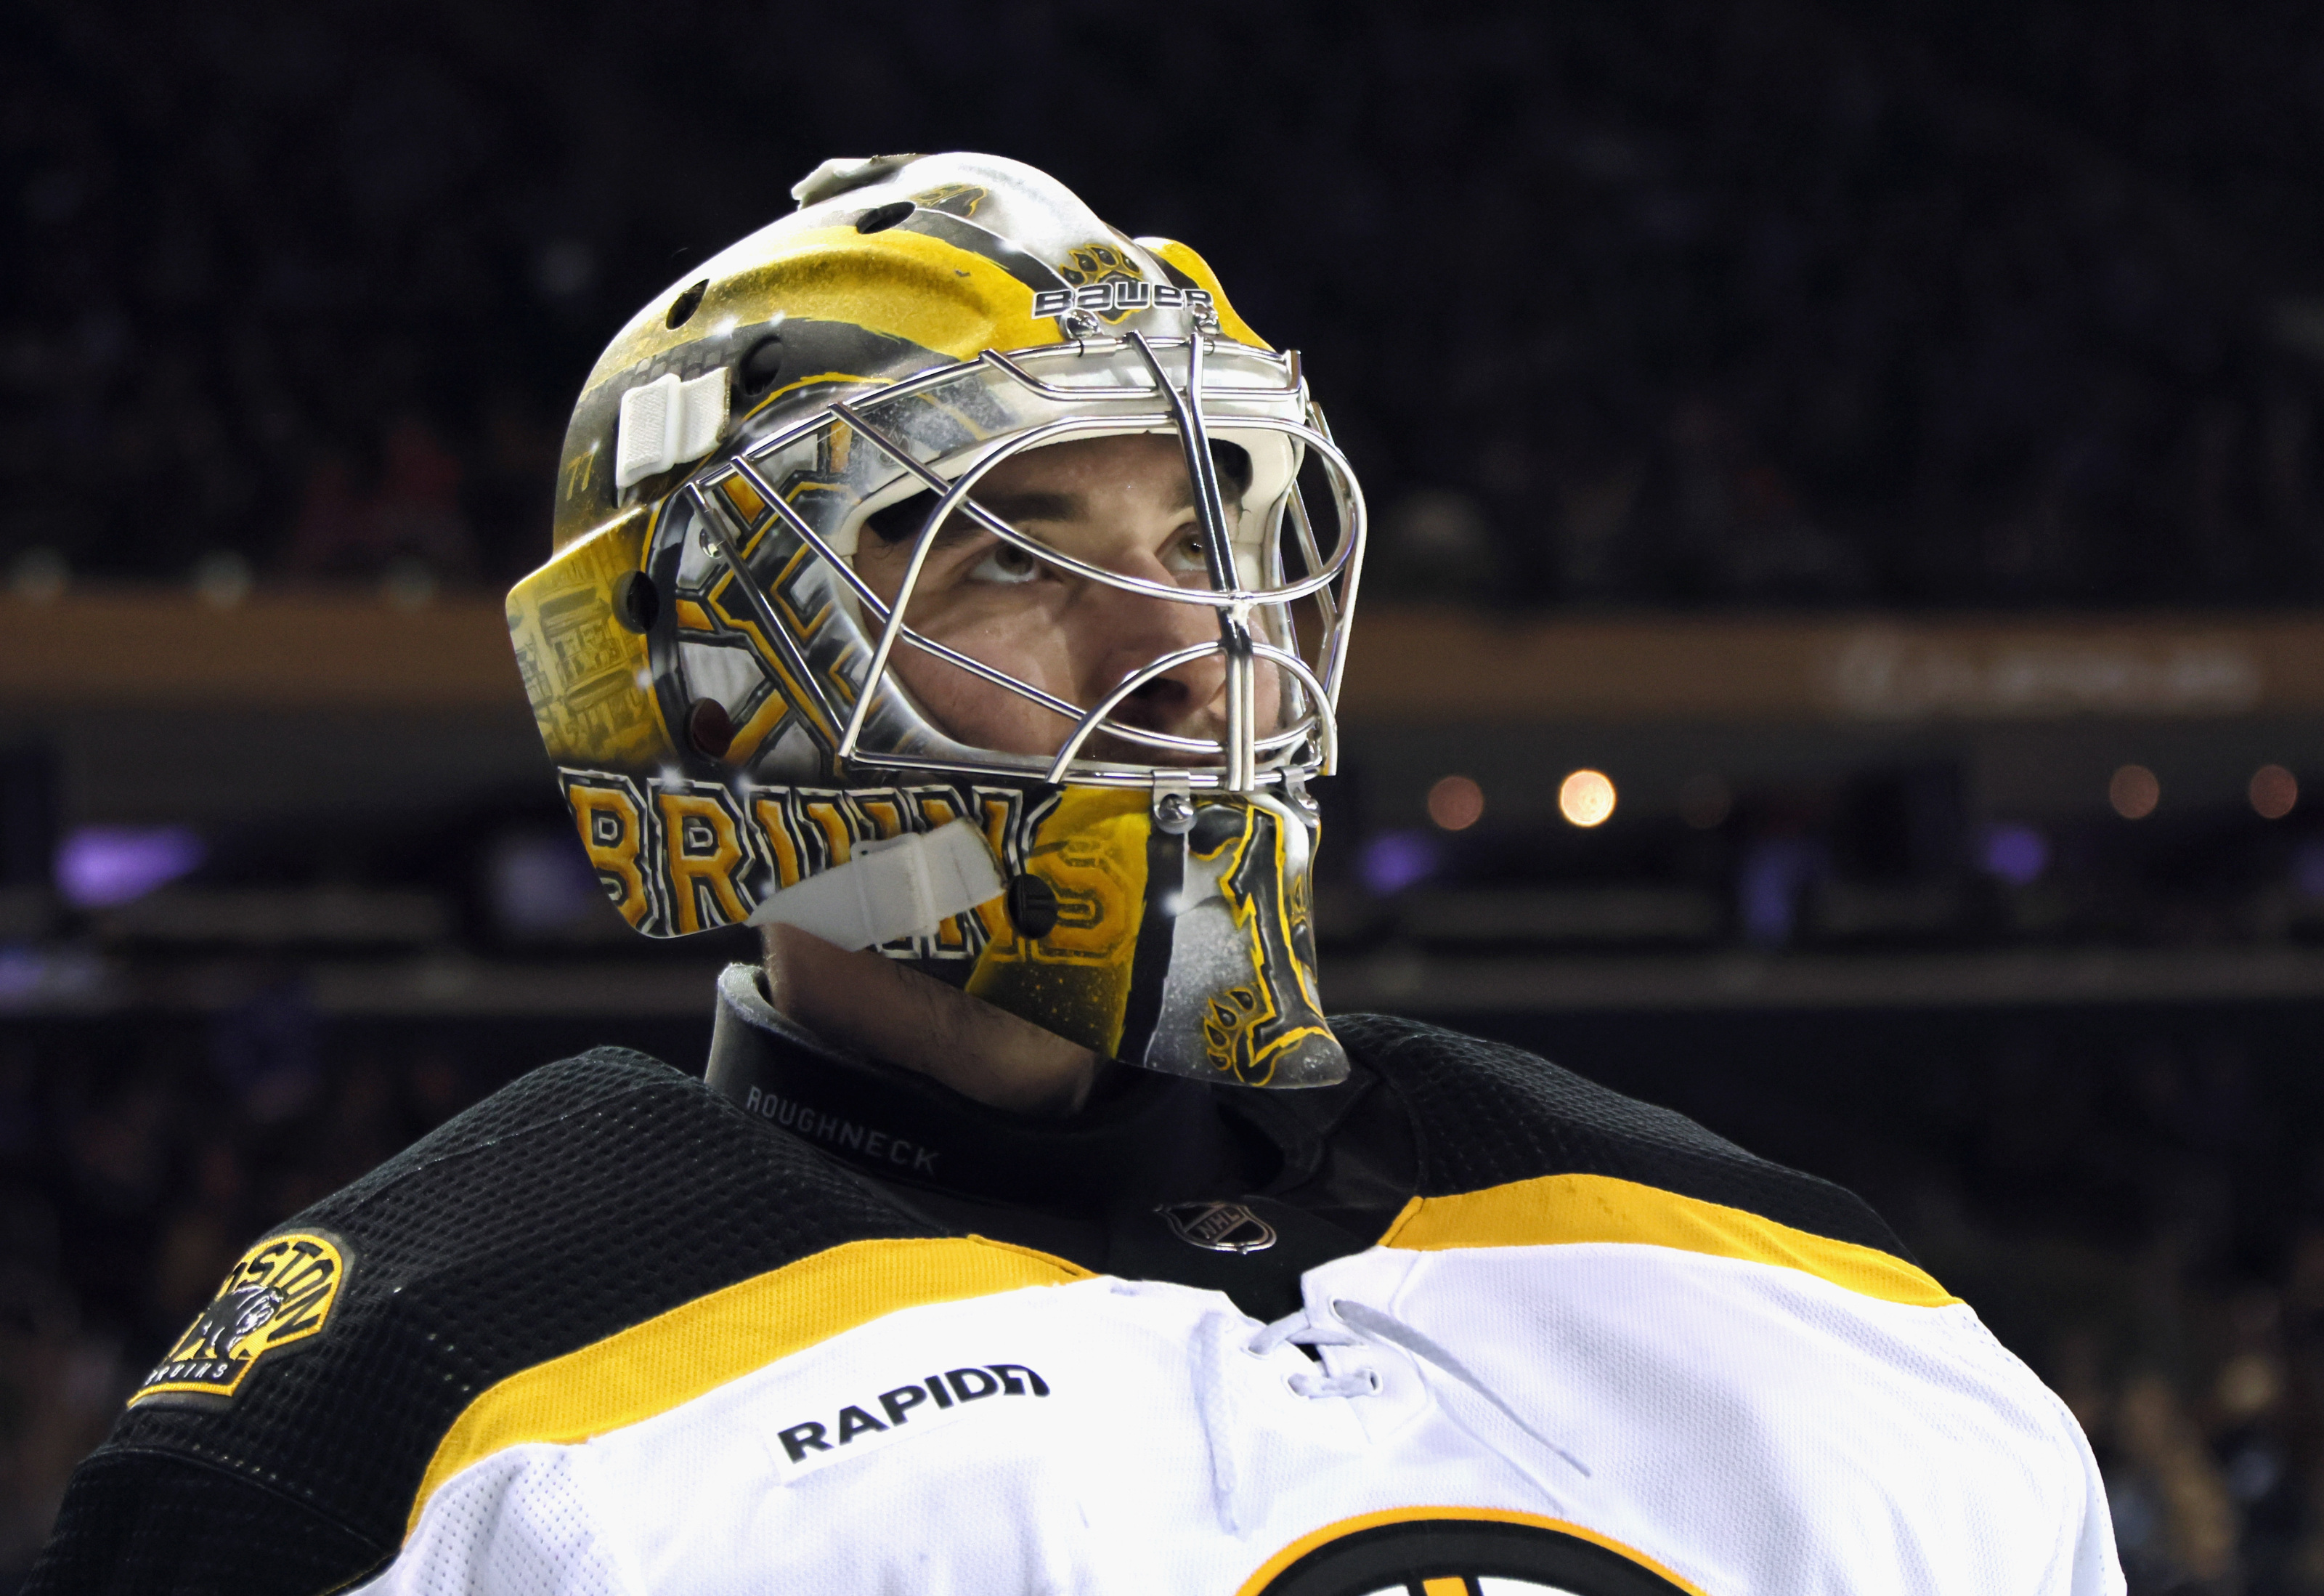 Where did Bruins goalie Jeremy Swayman get his drive to succeed